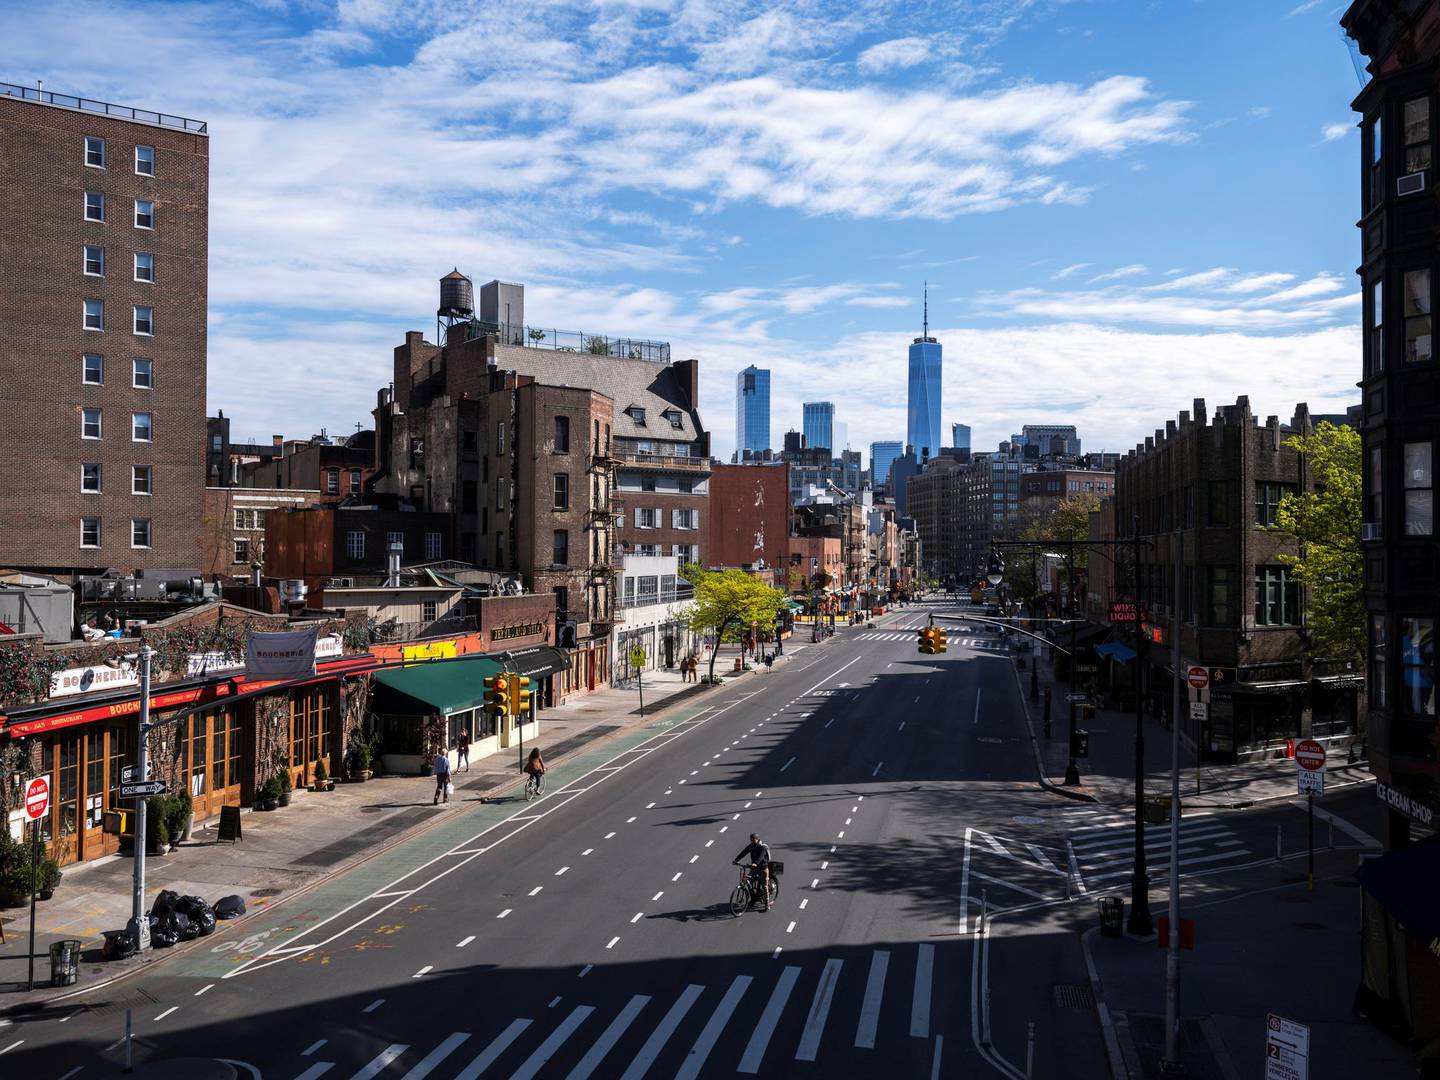 FILE PHOTO: A cyclist rides up 7th Avenue past the West Village neighborhood as streets remain less busy due to the continuing outbreak of the coronavirus disease (COVID-19) in the Manhattan borough of New York U.S., May 5, 2020. Picture taken May 5, 2020 at 4:48PM. REUTERS/Lucas Jackson/File Photo